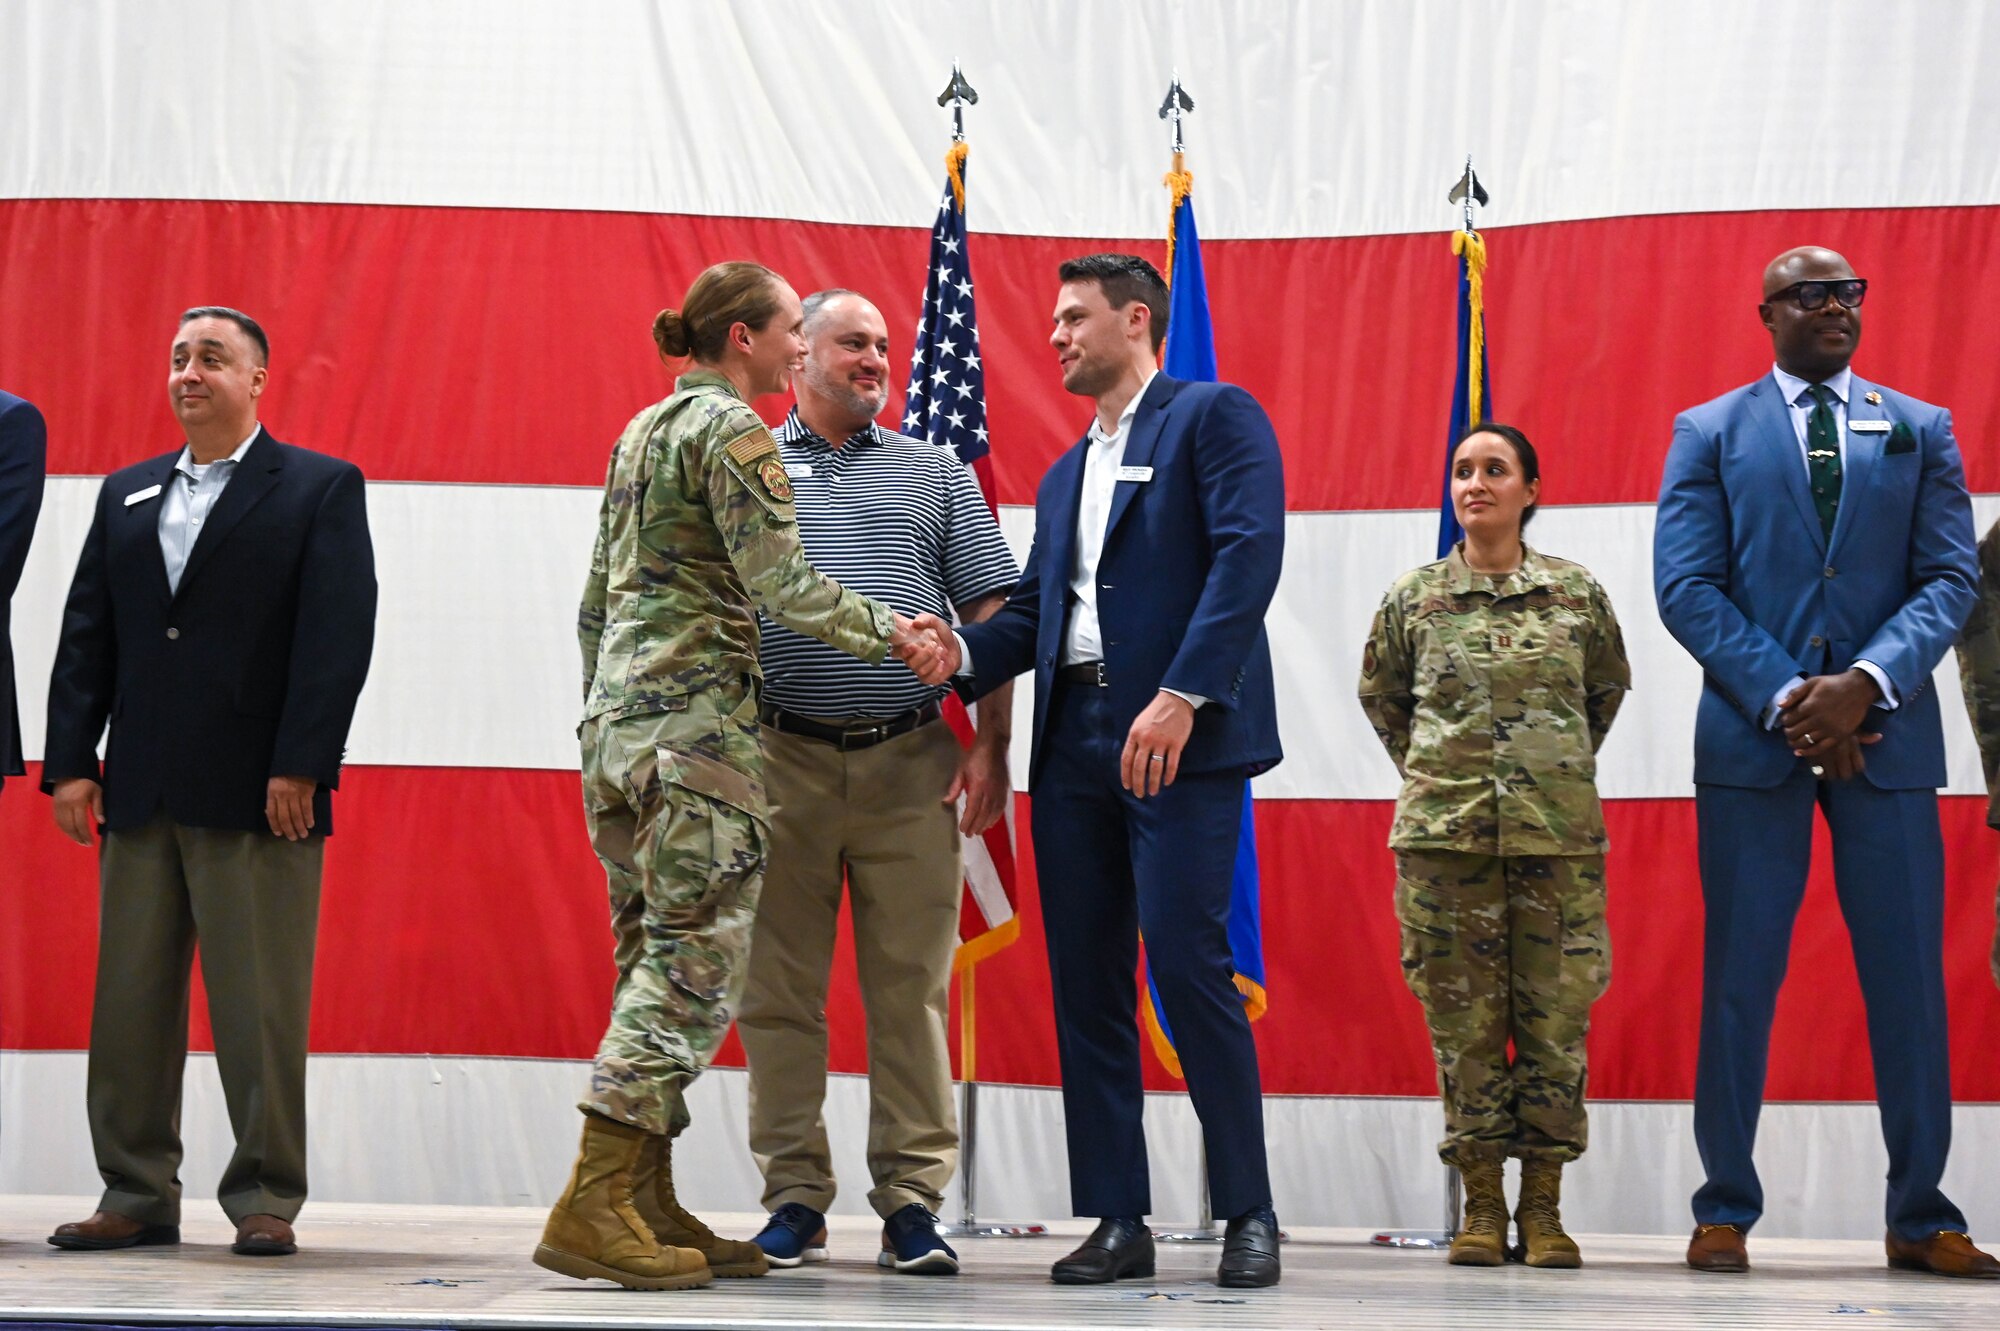 U.S. Air Force Lt. Col. Kristen Schnell, 56th Comptroller Squadron commander, coins Gabe Hill and Kevin Michalzuk, honorary commander inductees, during a ceremony, Oct. 14, 2022, at Luke Air Force Base, Arizona.